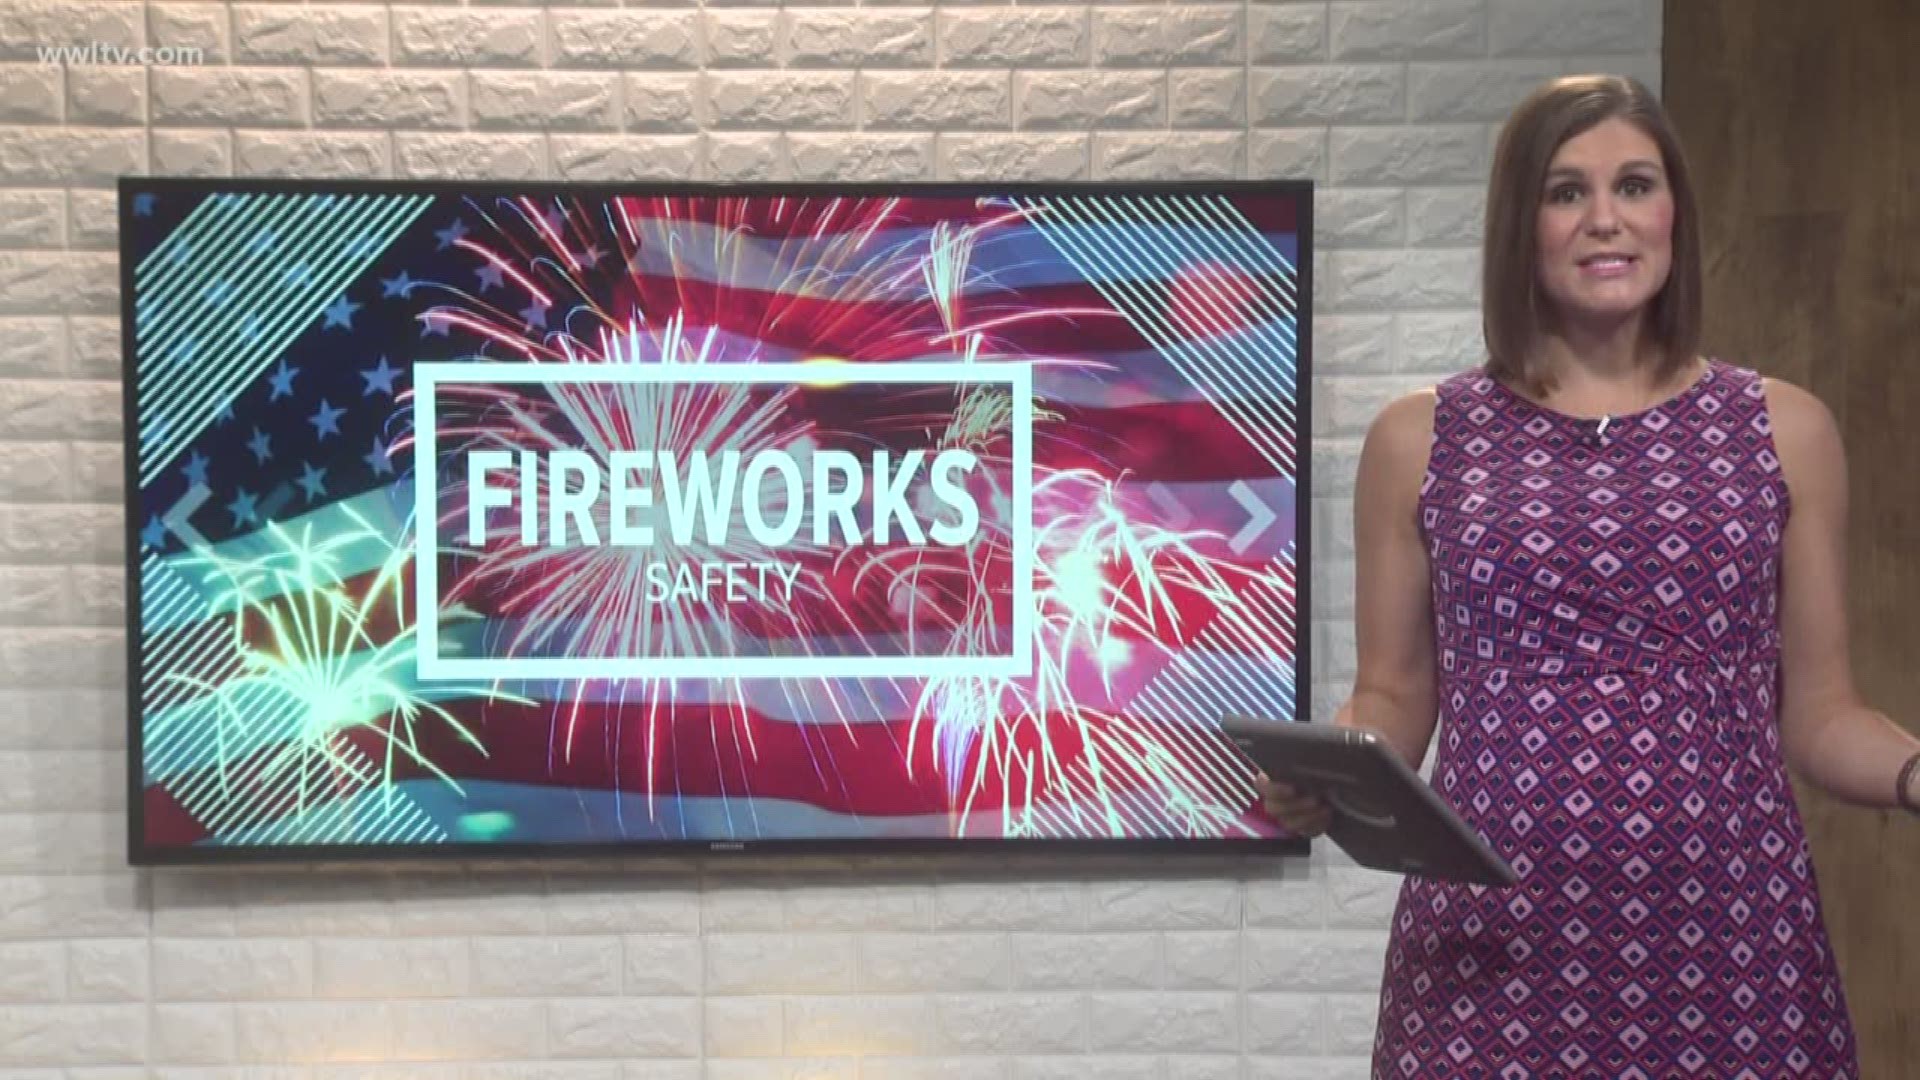 Fireworks safety tips for Fourth of July